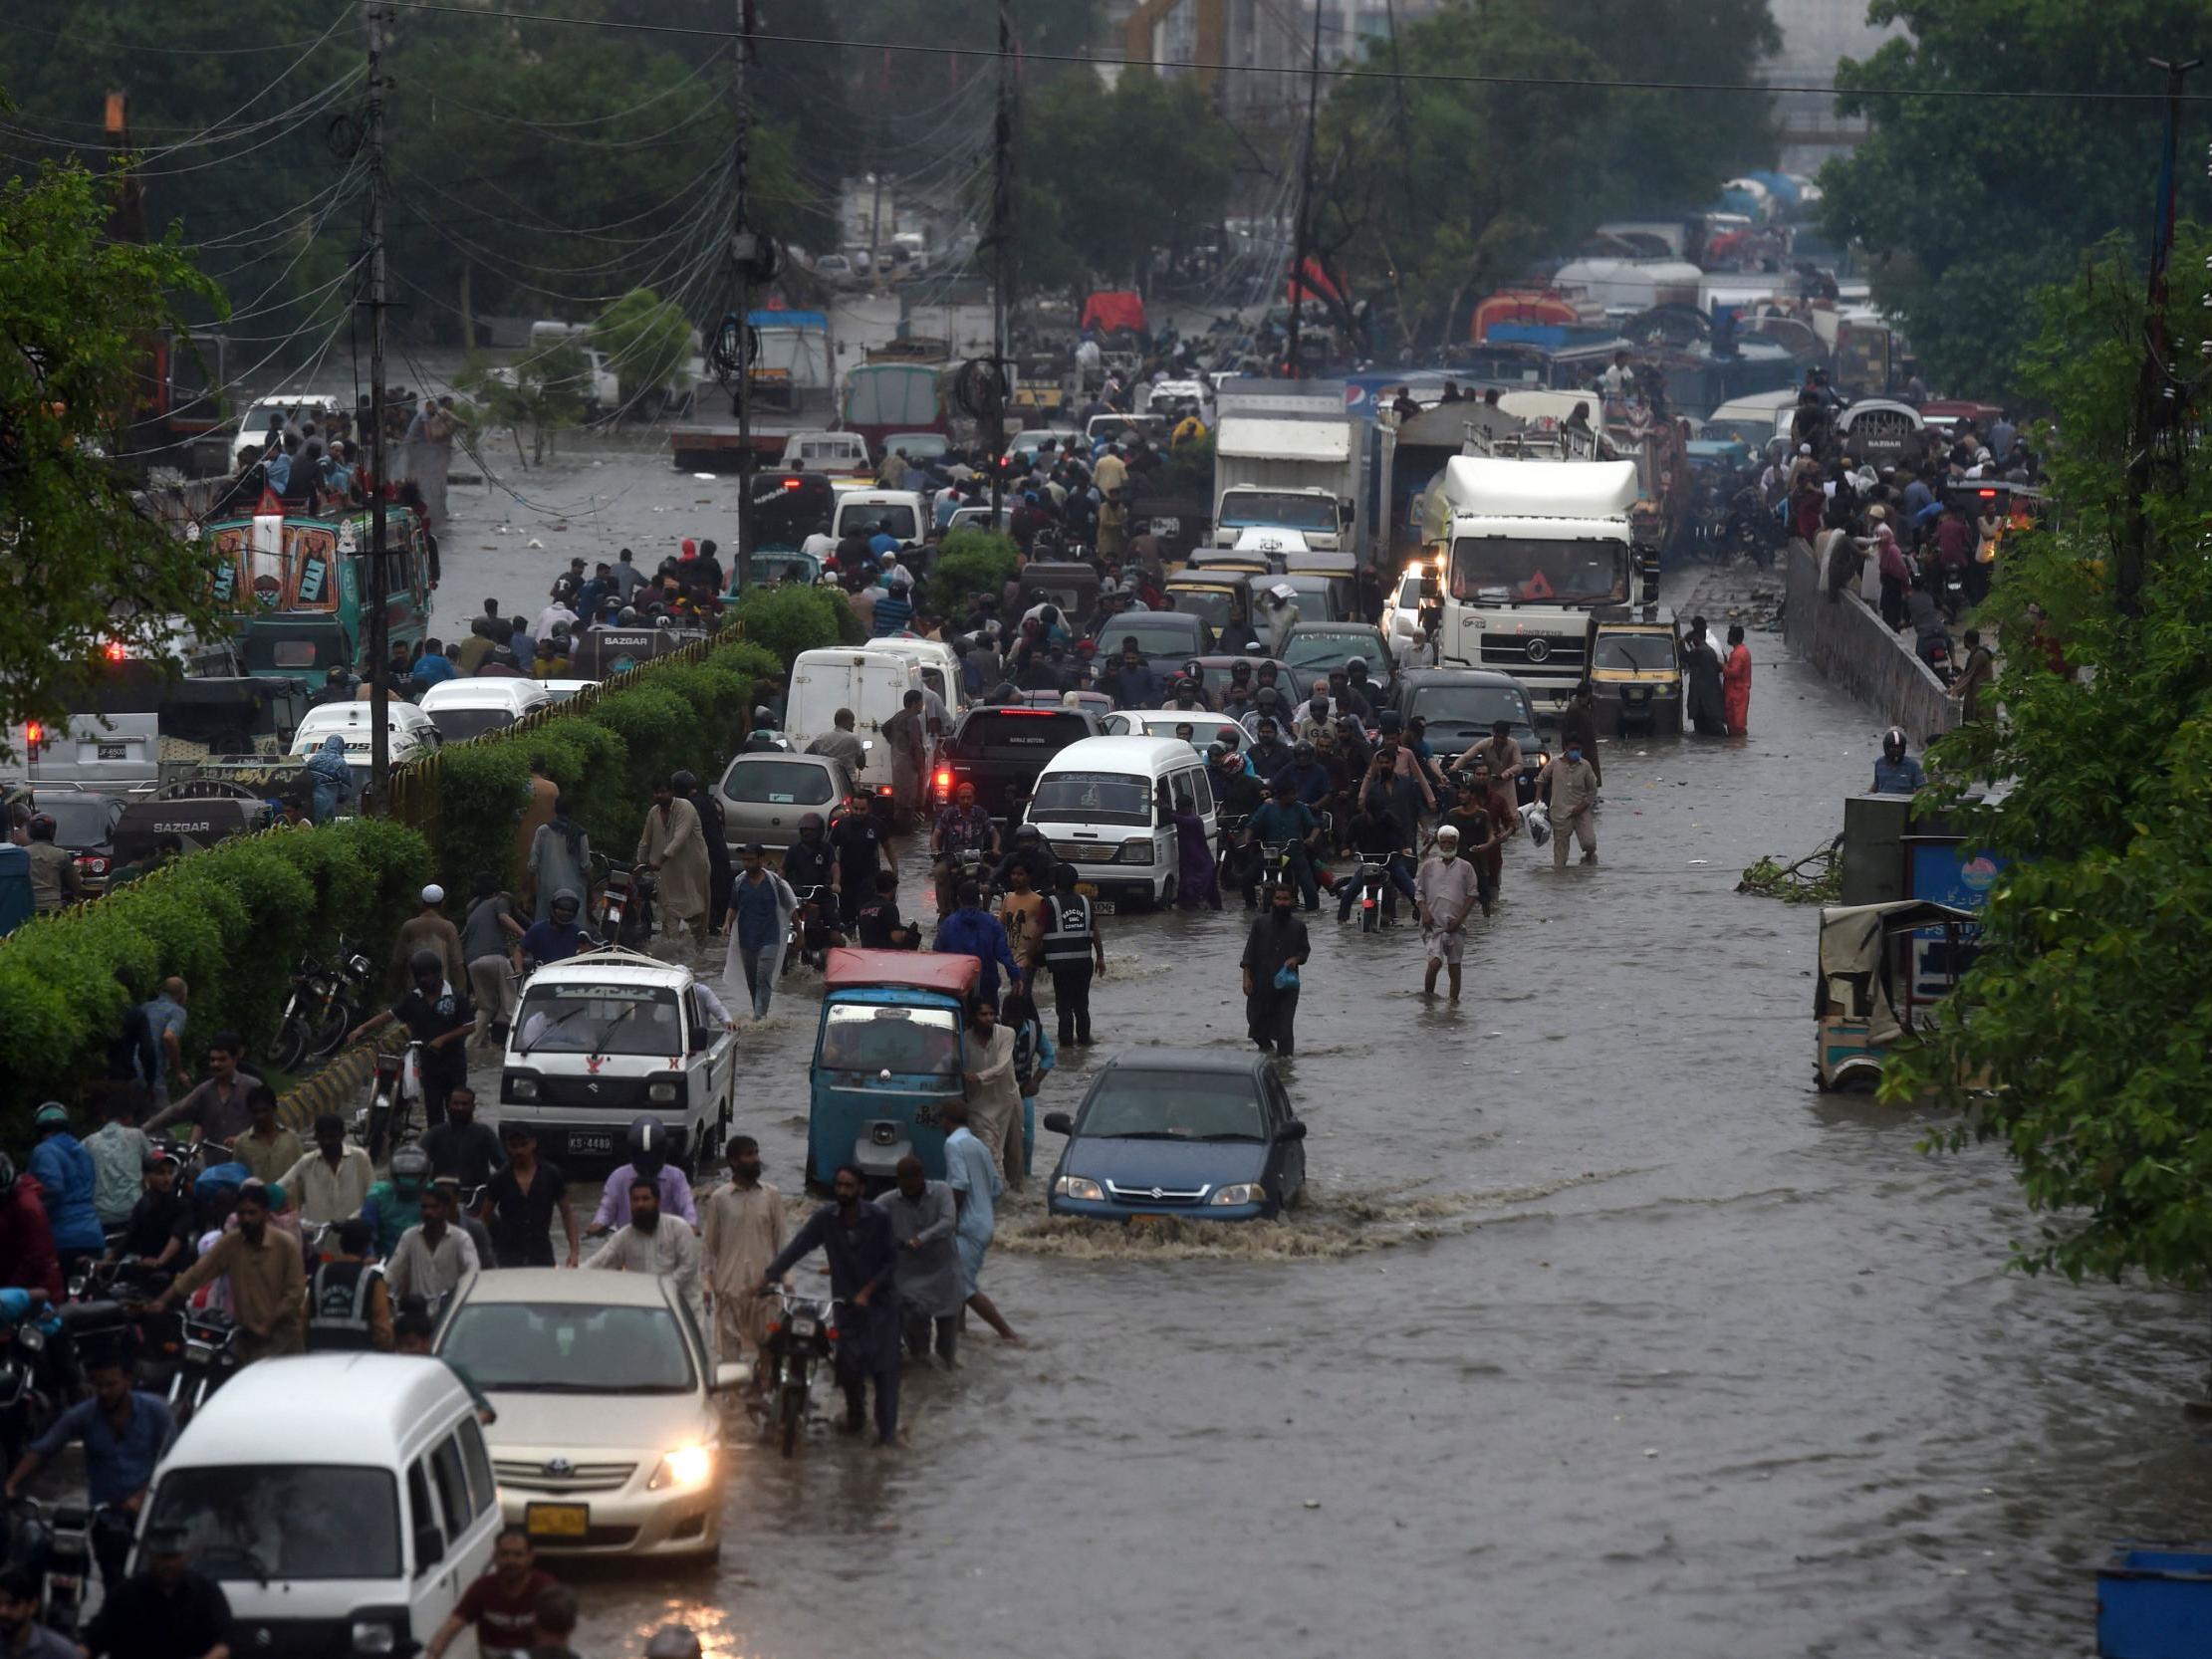 Commuters make their way along a flooded street after heavy monsoon rains in Pakistan's port city of Karachi